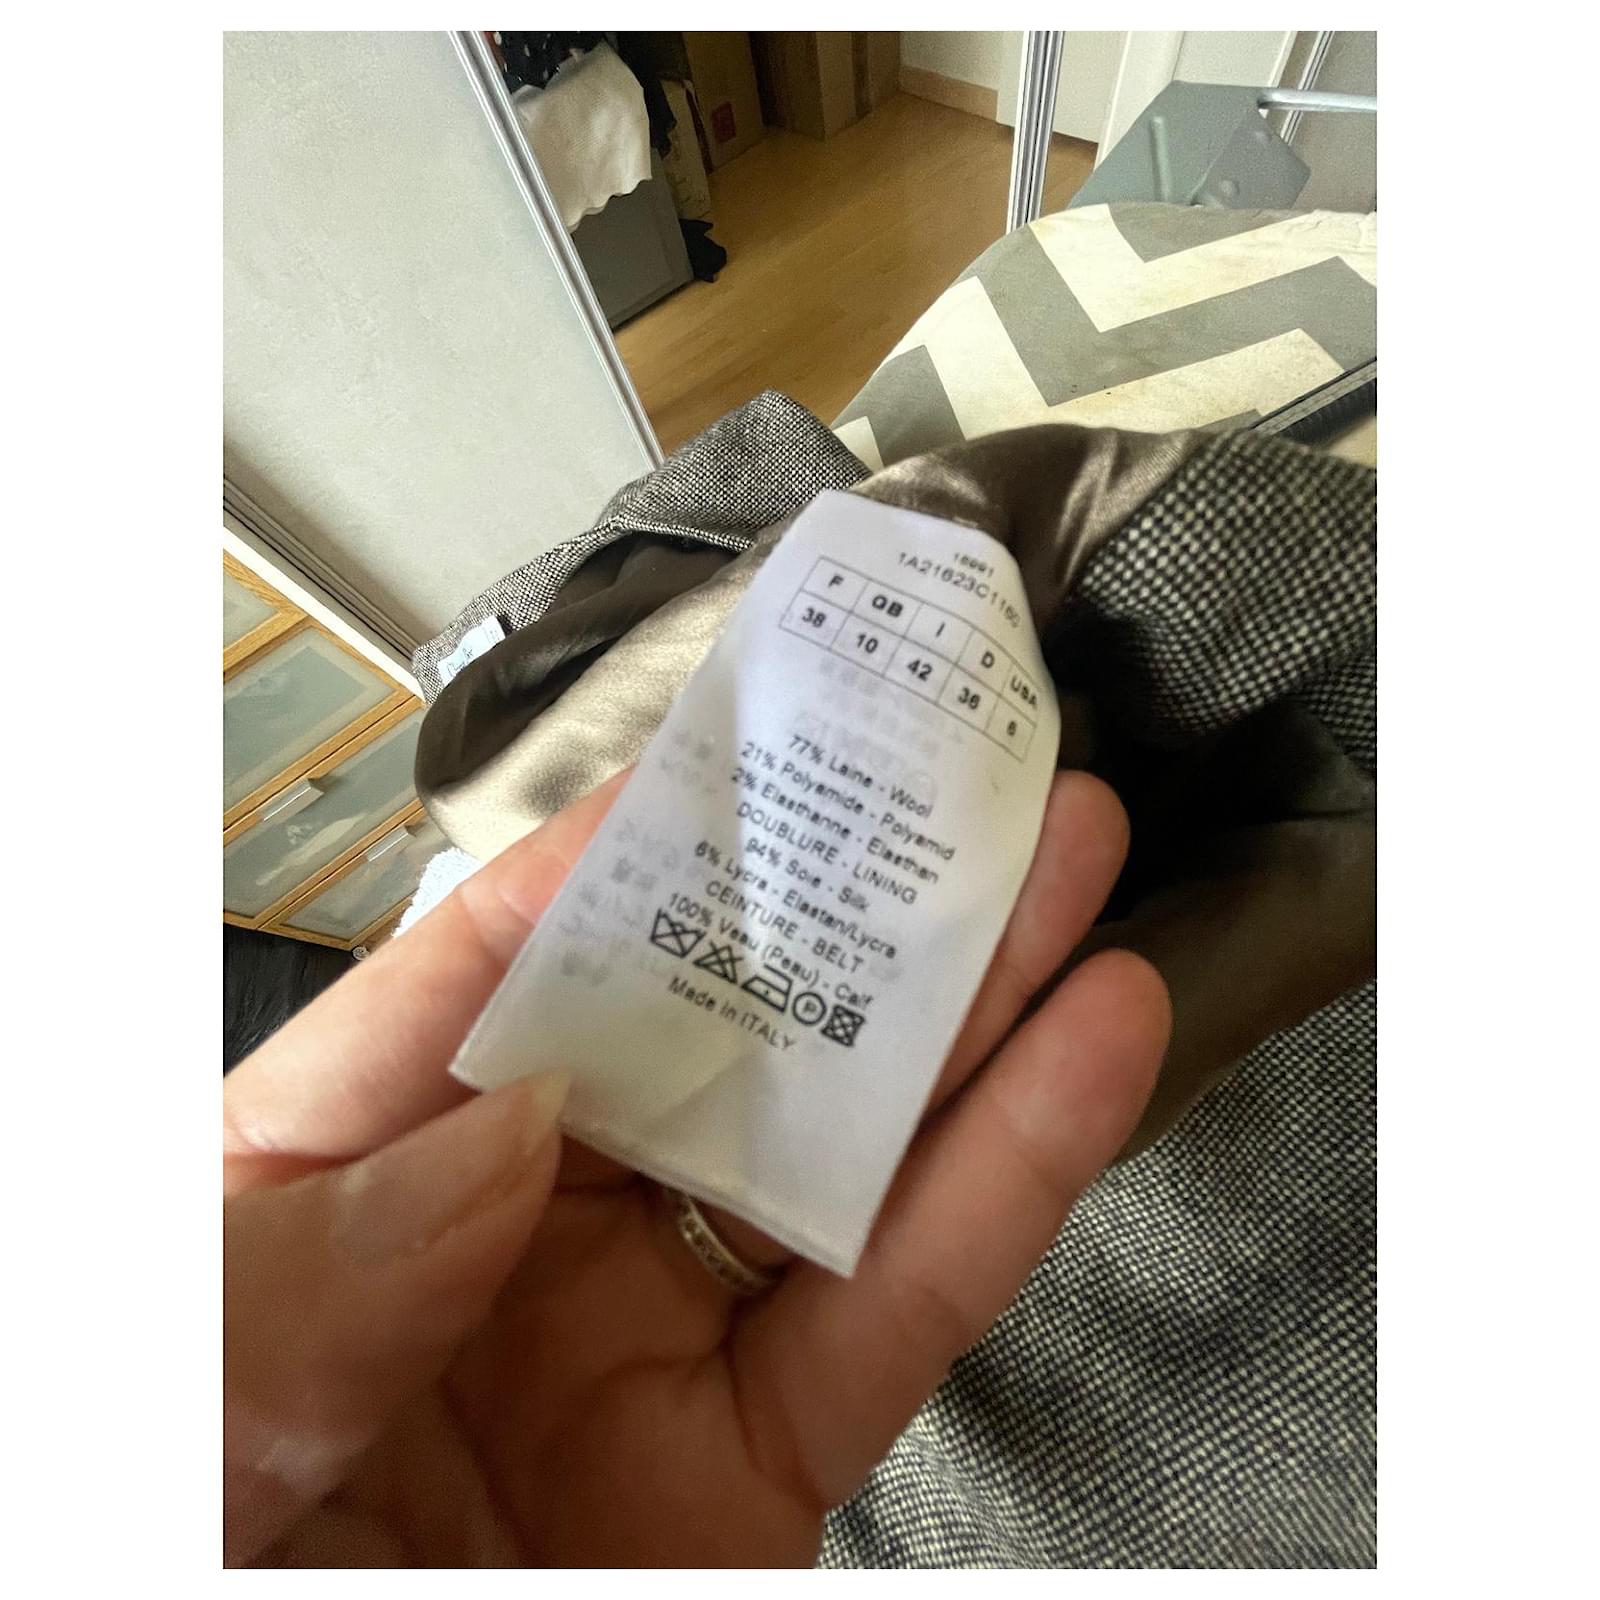 Is this LV receipt from Italy legit?